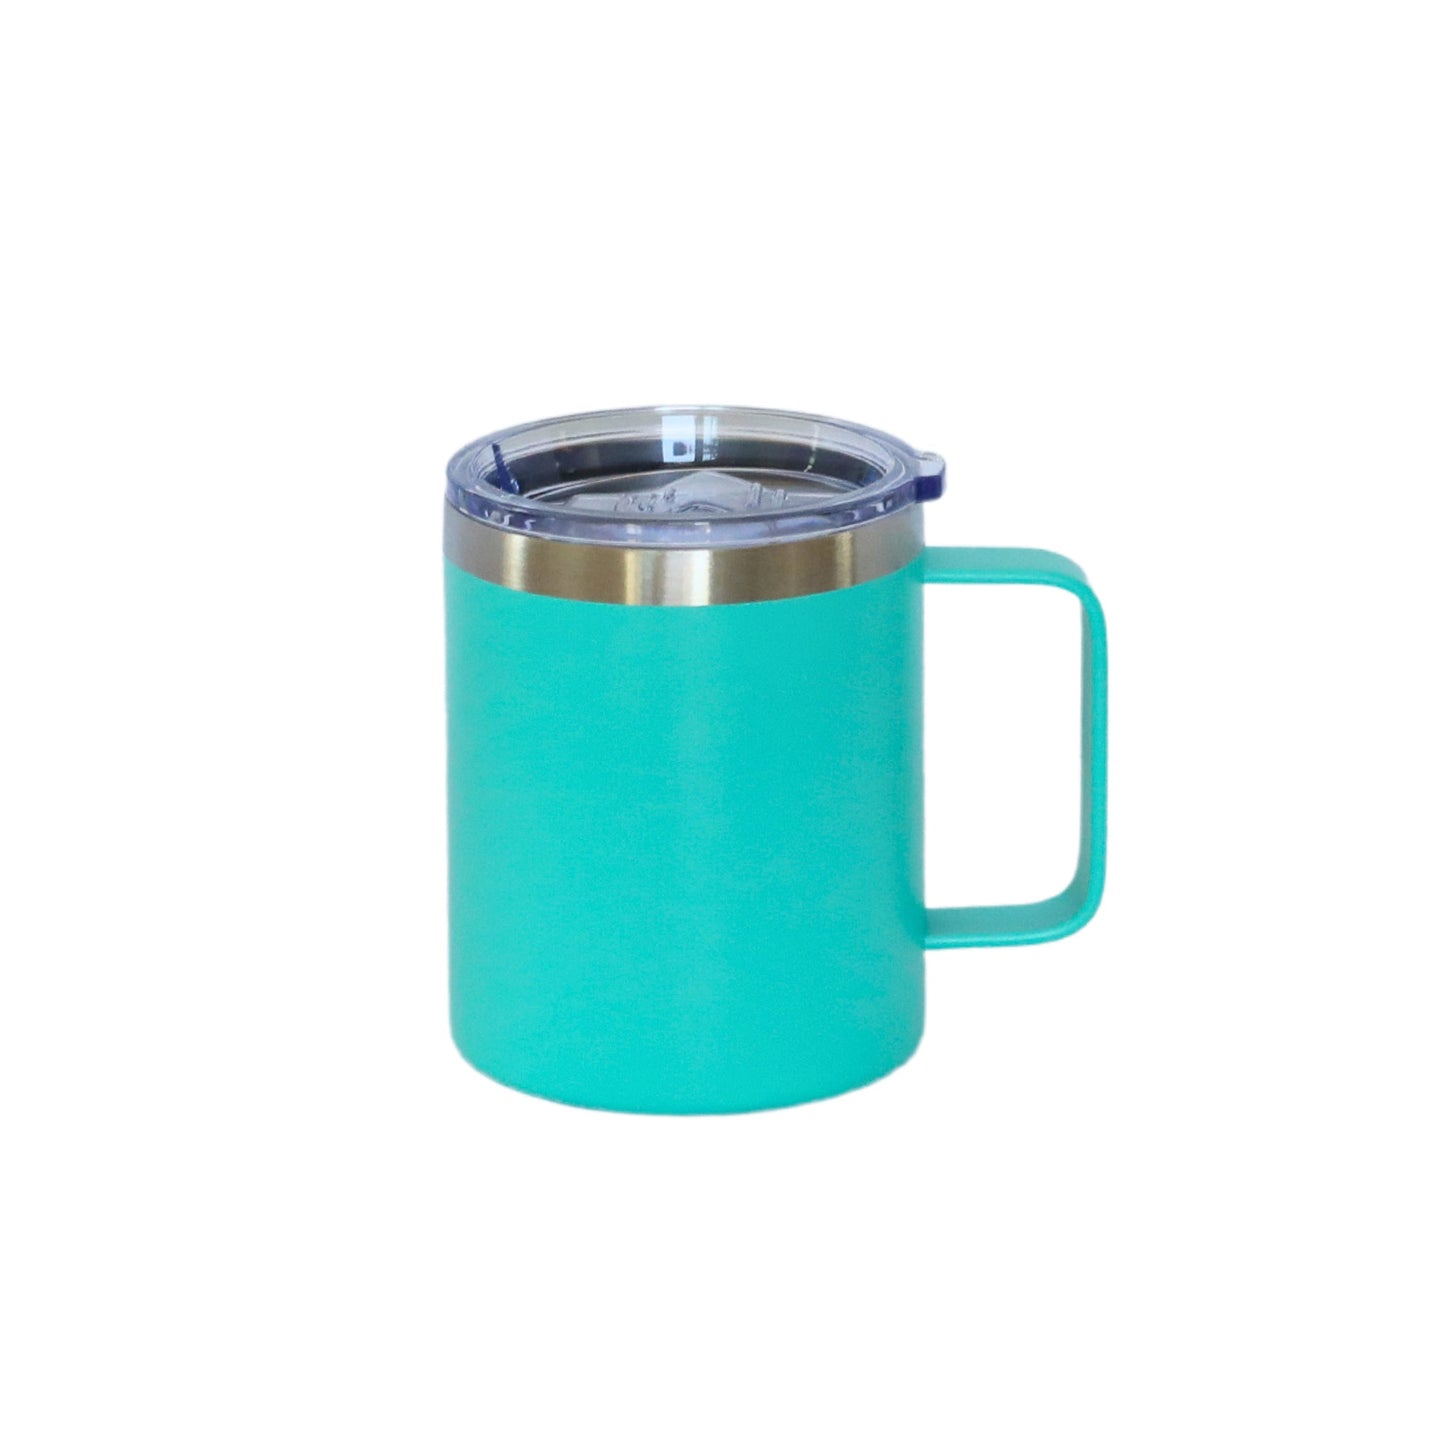 12 Oz Stainless Steel Travel Mug with Handle - Aqua by Creative Gifts